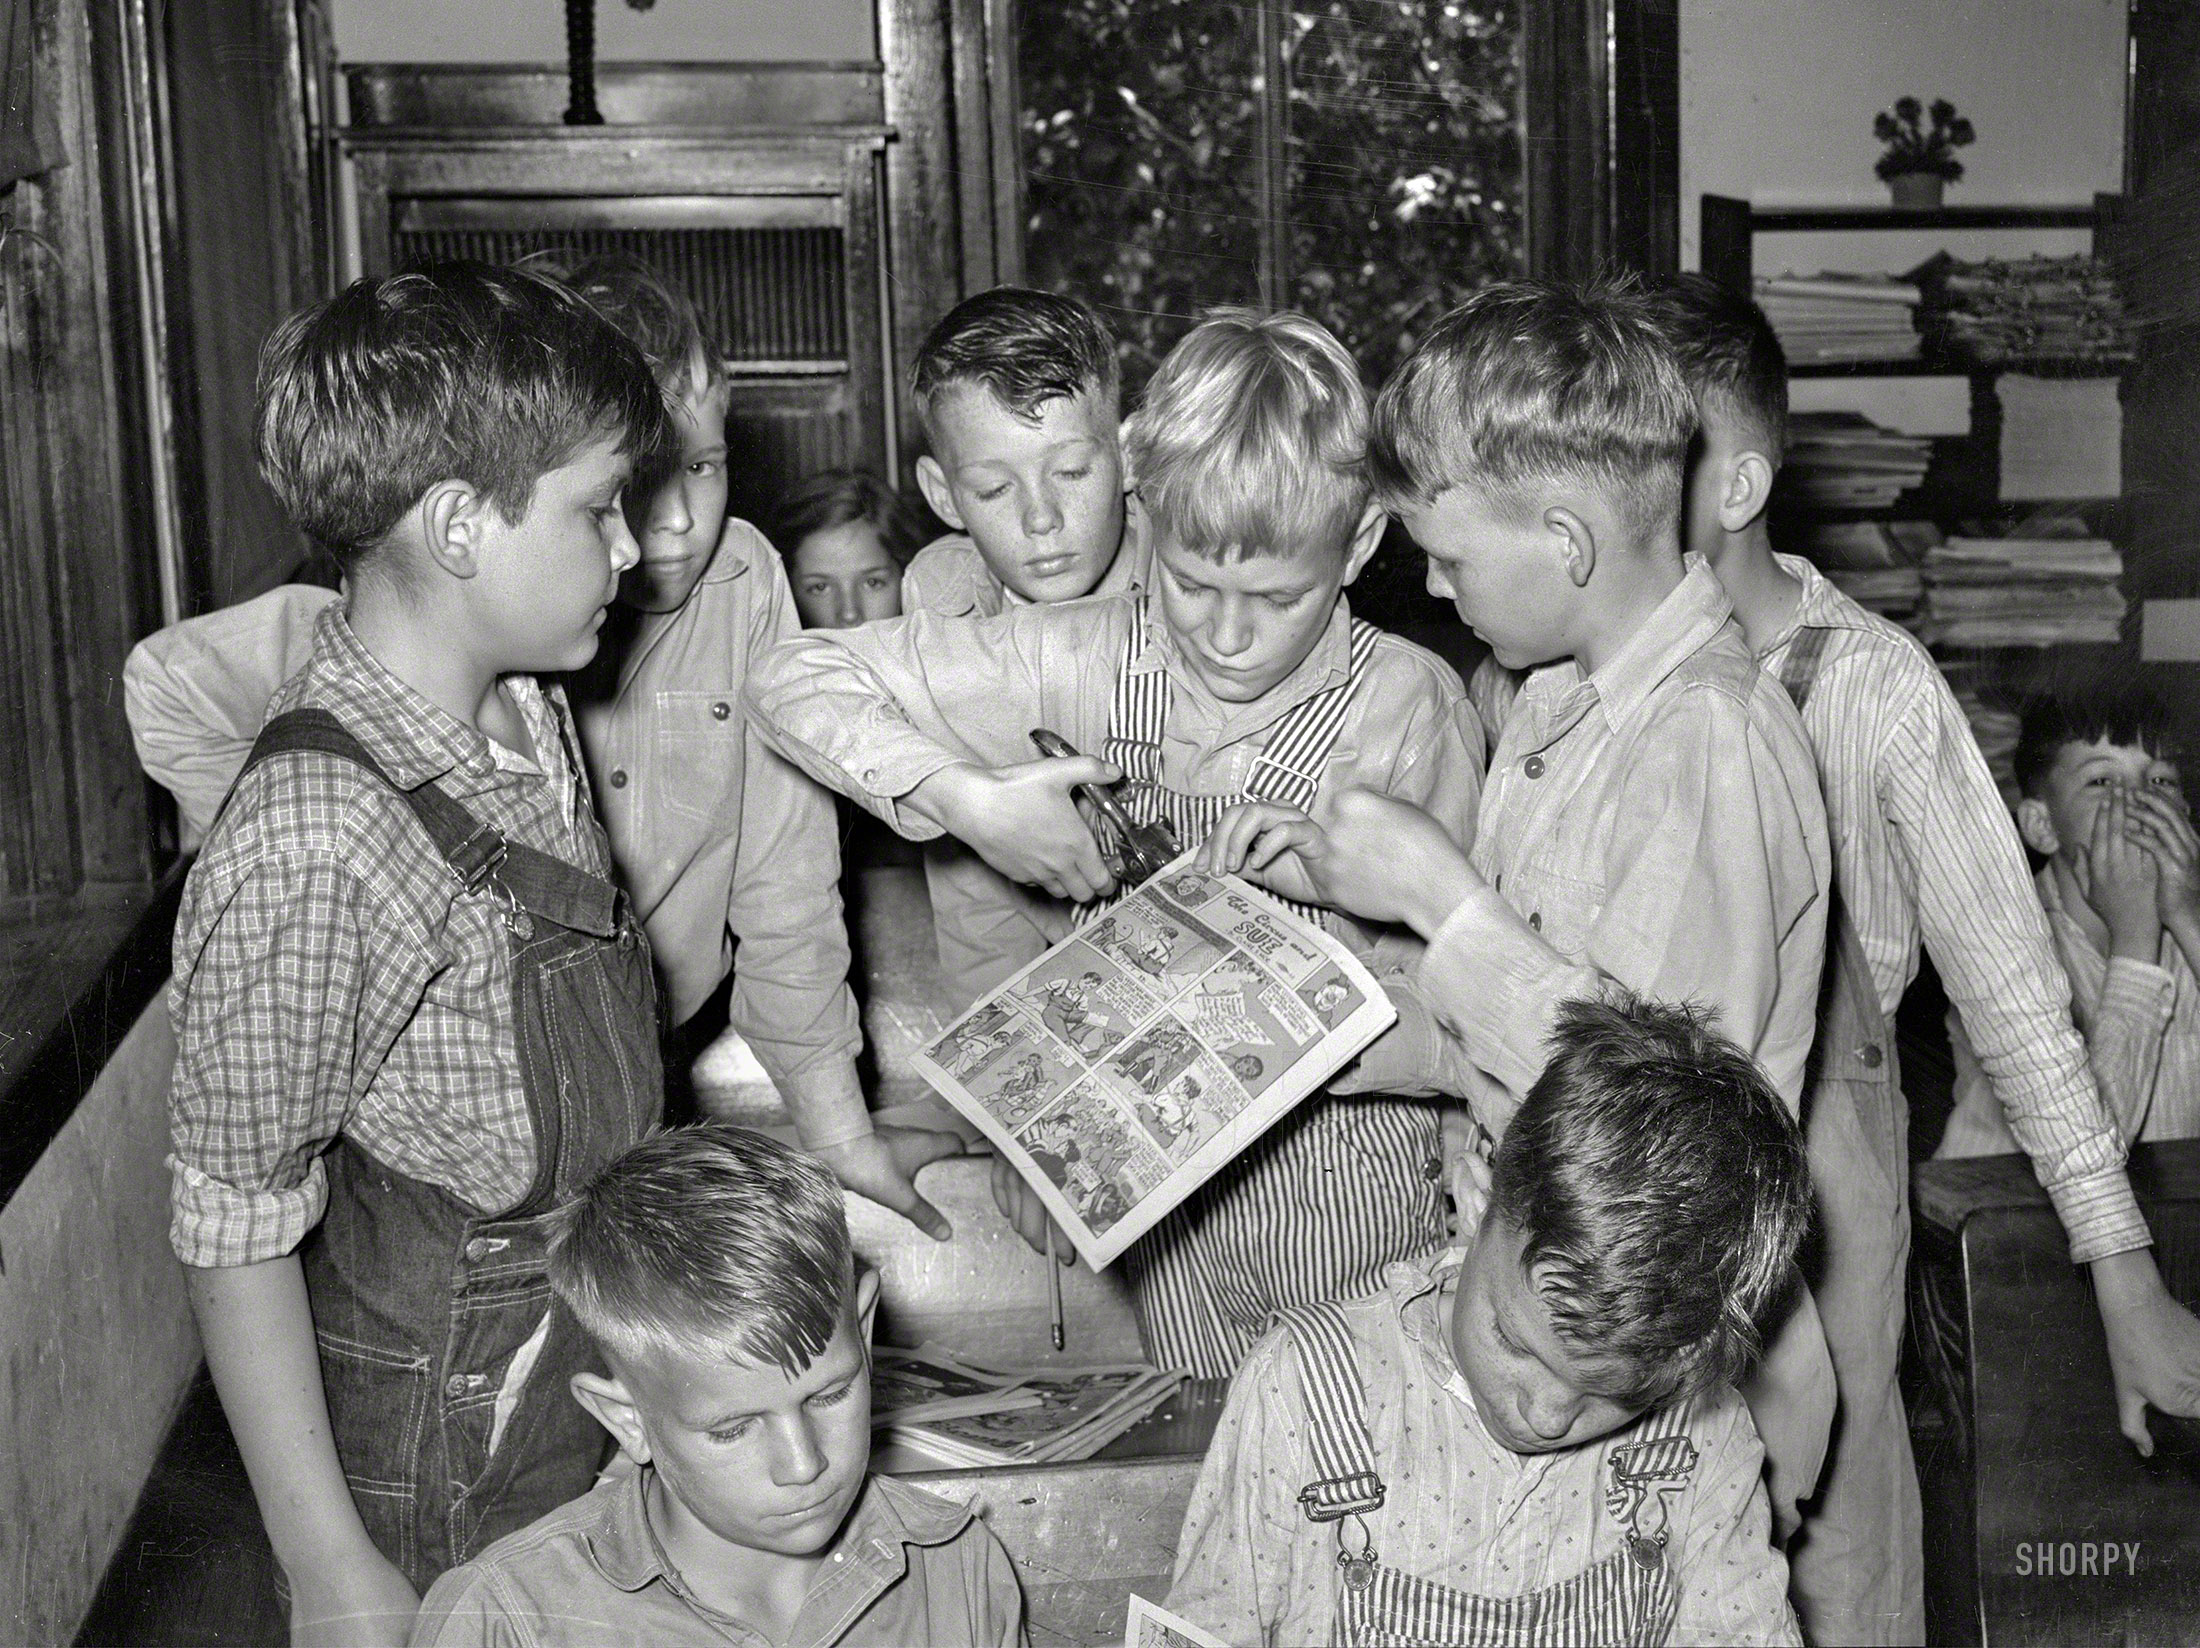 &nbsp; &nbsp; &nbsp; &nbsp; The comic: "The Circus and Sue," by Claire S. Moe.
April 1939. San Augustine, Texas. "Grade-school boys making books of comic strips." Photo by Russell Lee, Farm Security Administration. View full size.